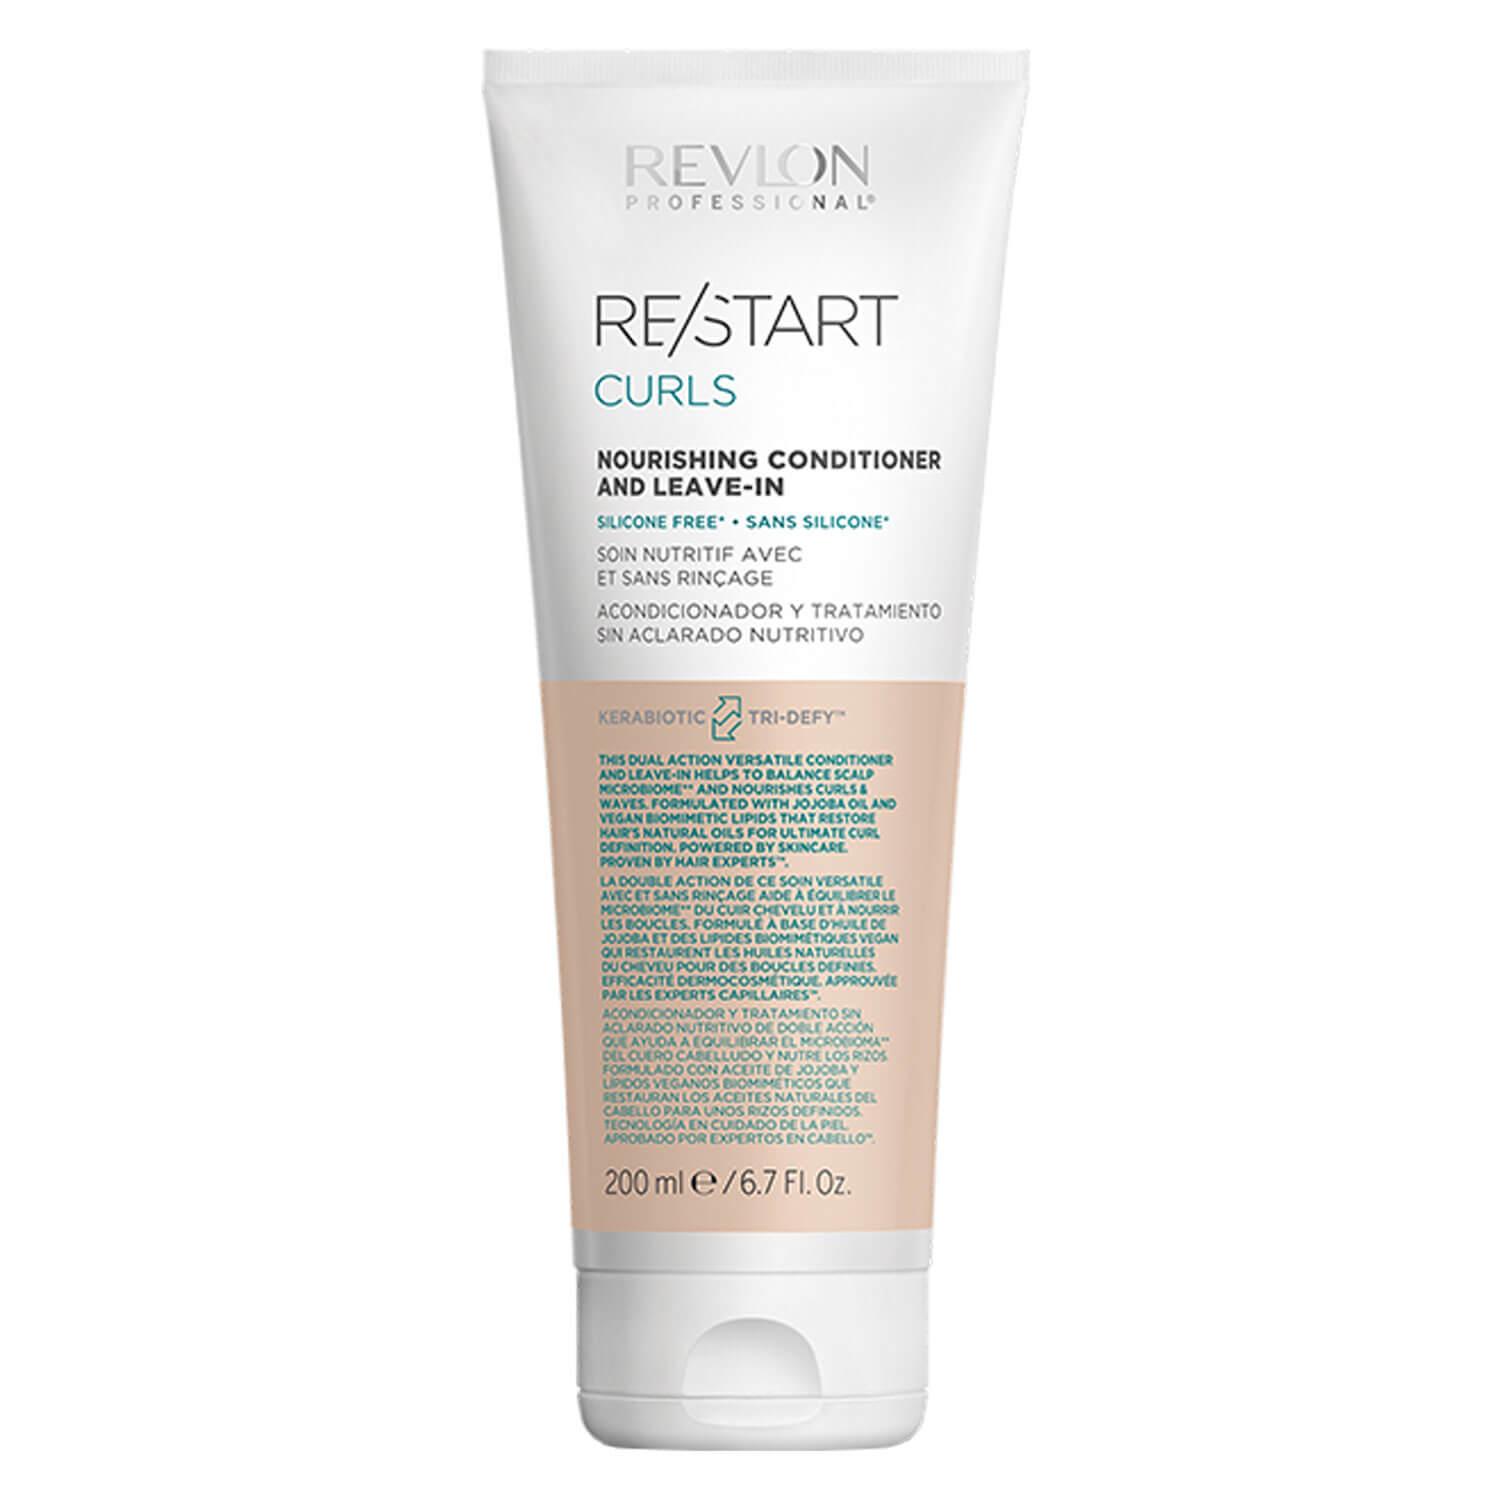 RE/START CURLS - Nourishing Conditioner and Leave-in